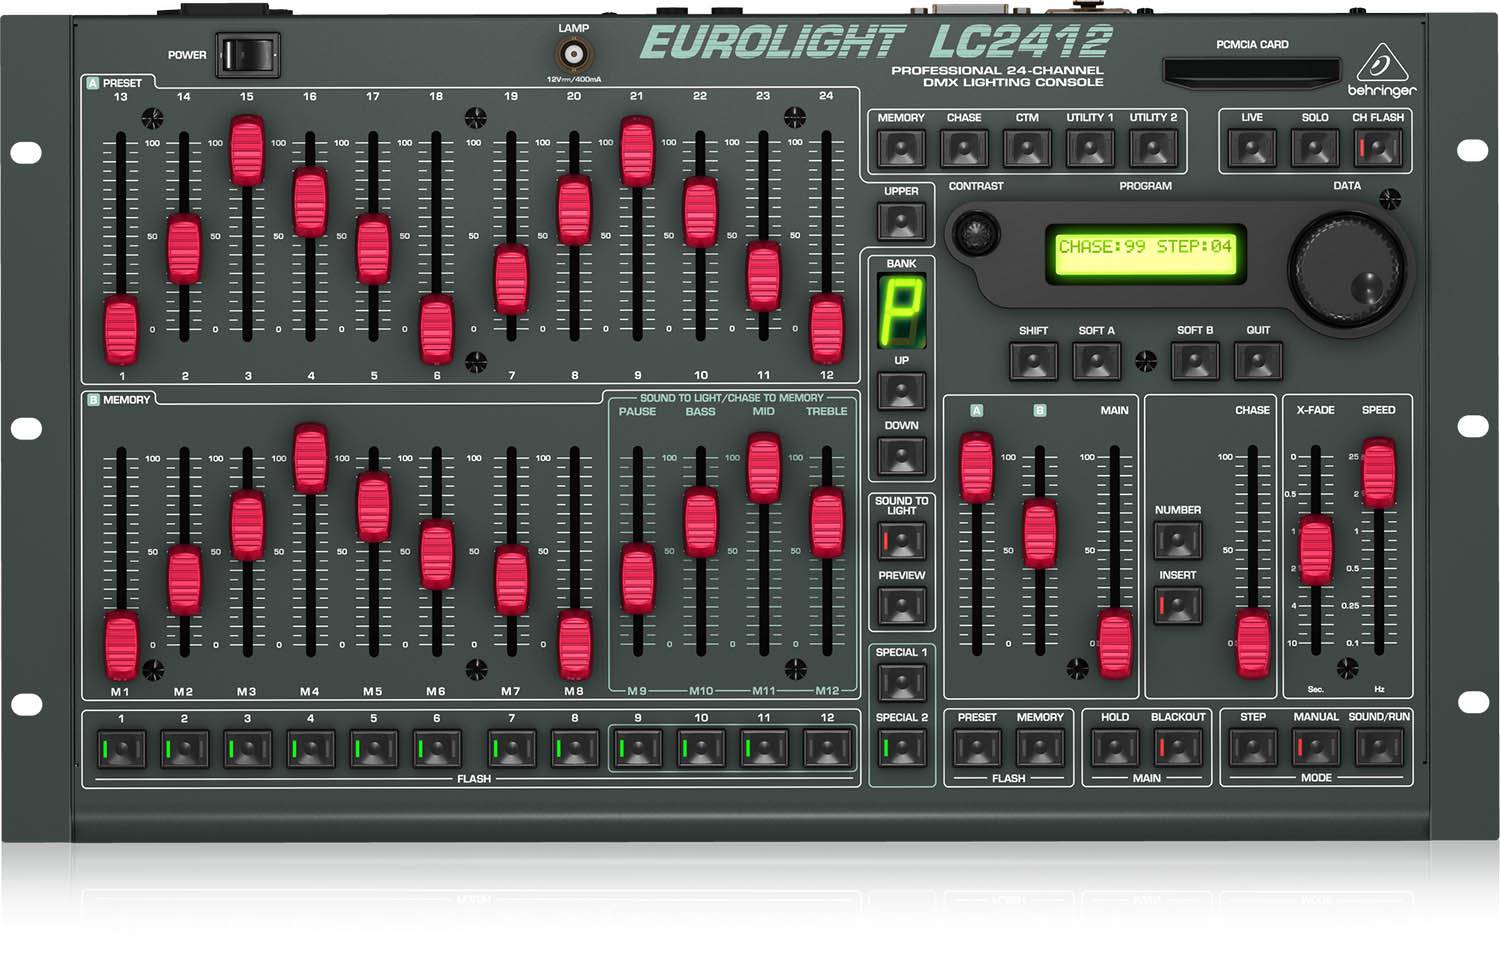 Behringer LC2412, Professional 24-Channel DMX Lighting Console - Hollywood DJ